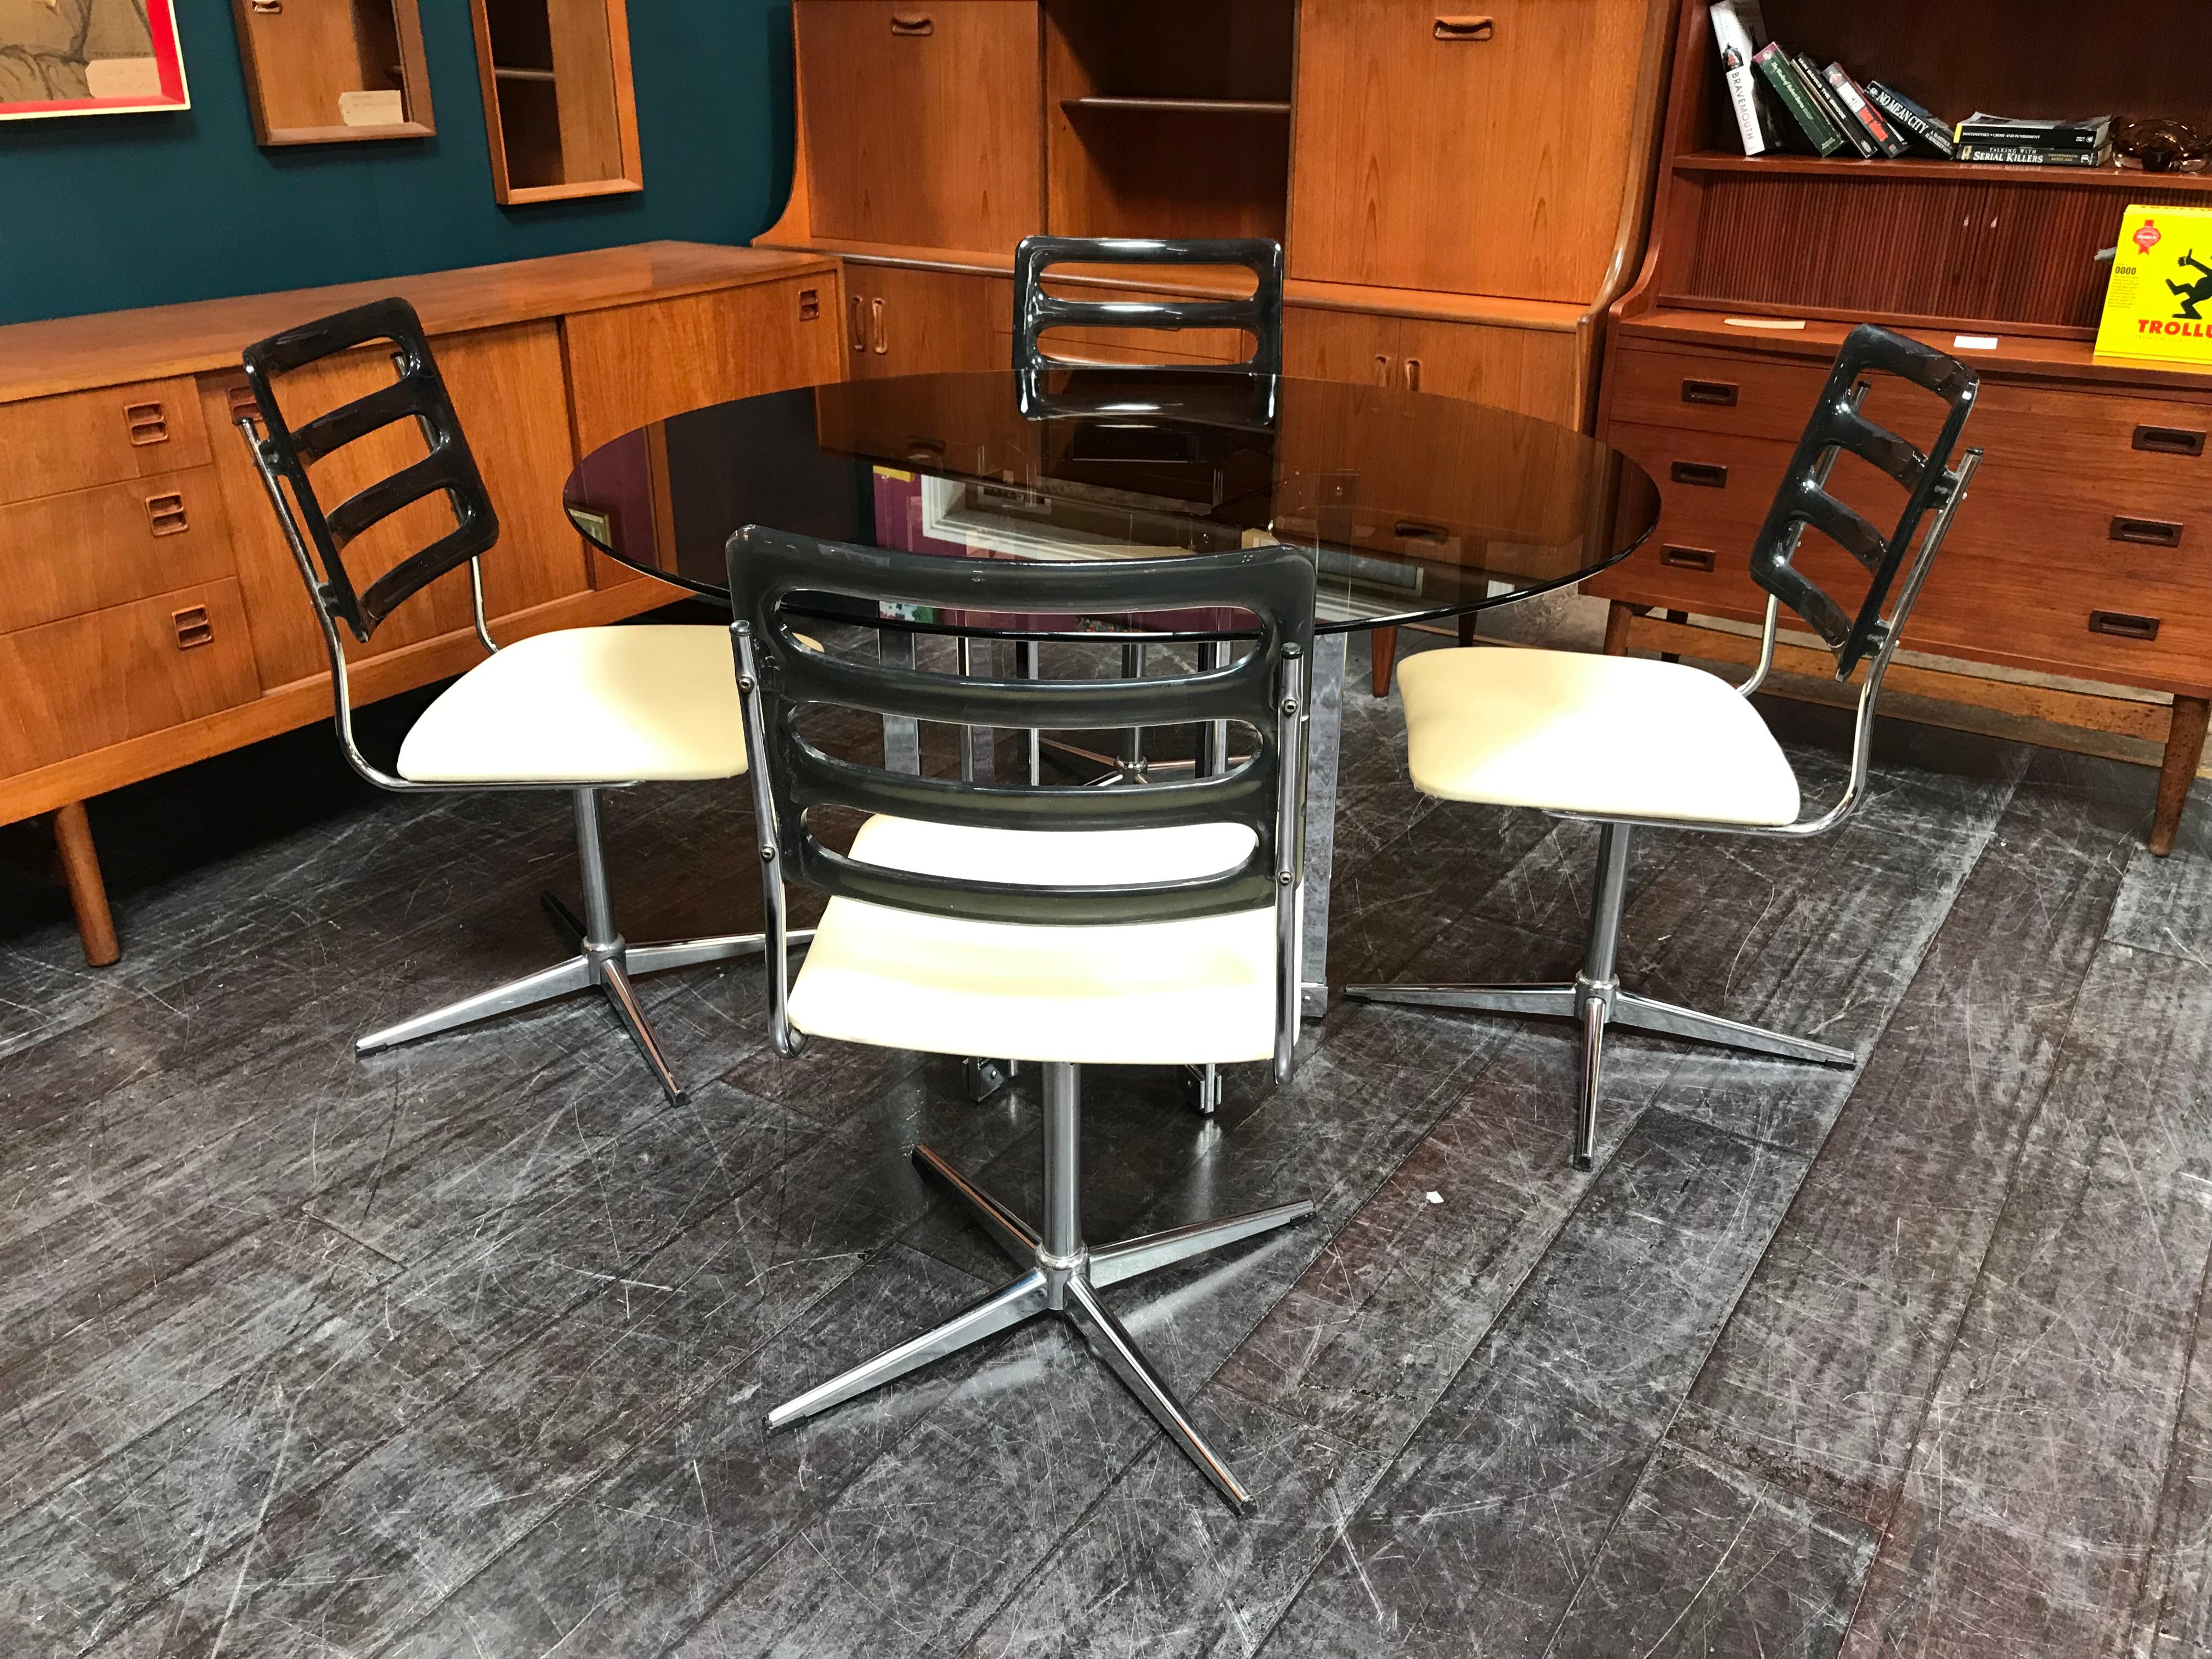 20th Century Mid Century Chrome & Glass Table by Richard Young for Merrow with 4 Chairs For Sale